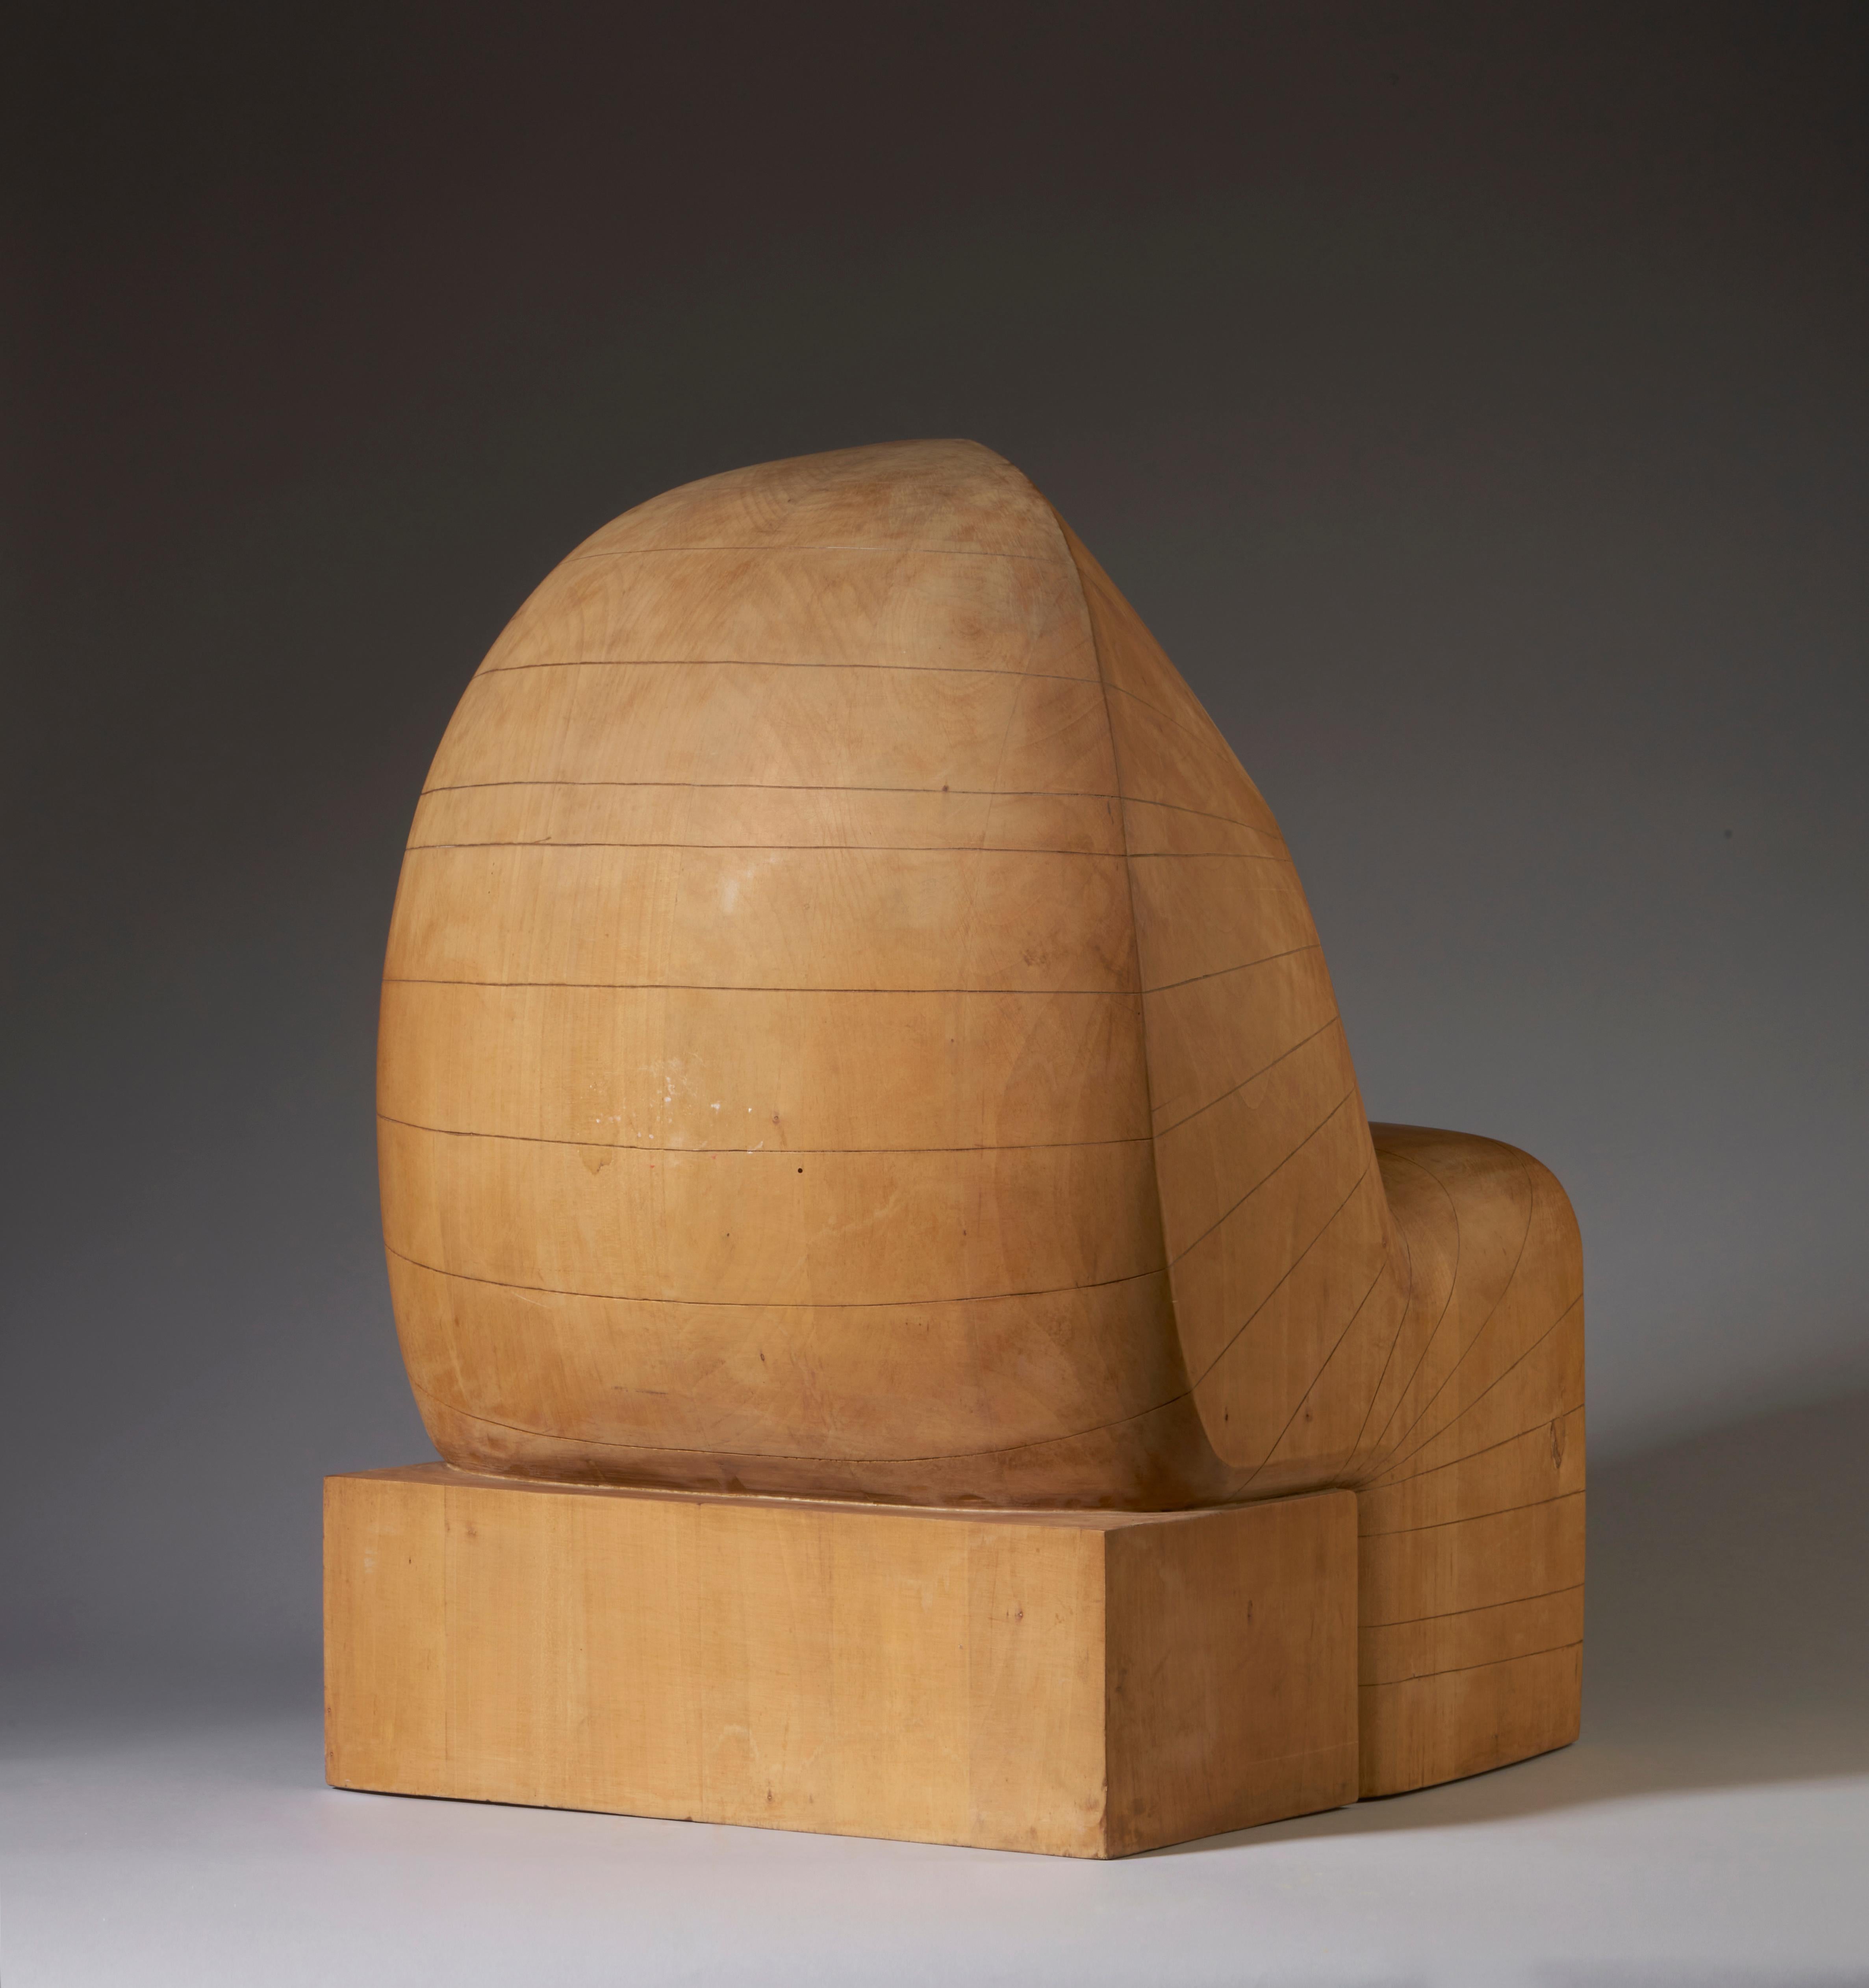 Giuseppe Rivadossi (Nave, July 8, 1935)  Shed, 1974 Wood sculpture For Sale 1